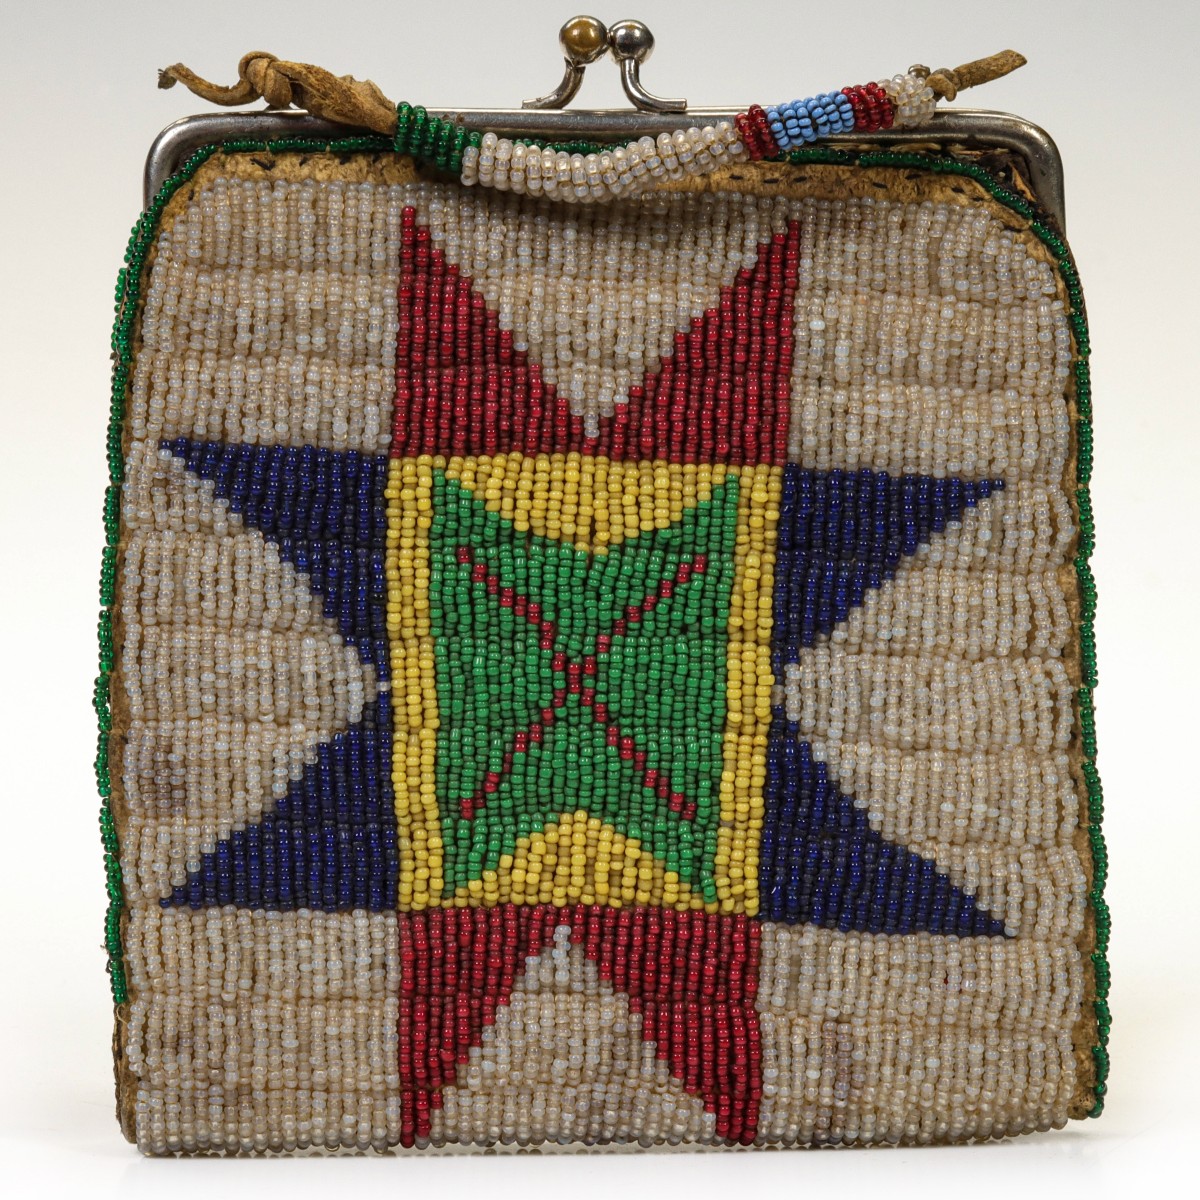 A COMMERCIALLY MADE PURSE WITH PLAINS REGION BEADING